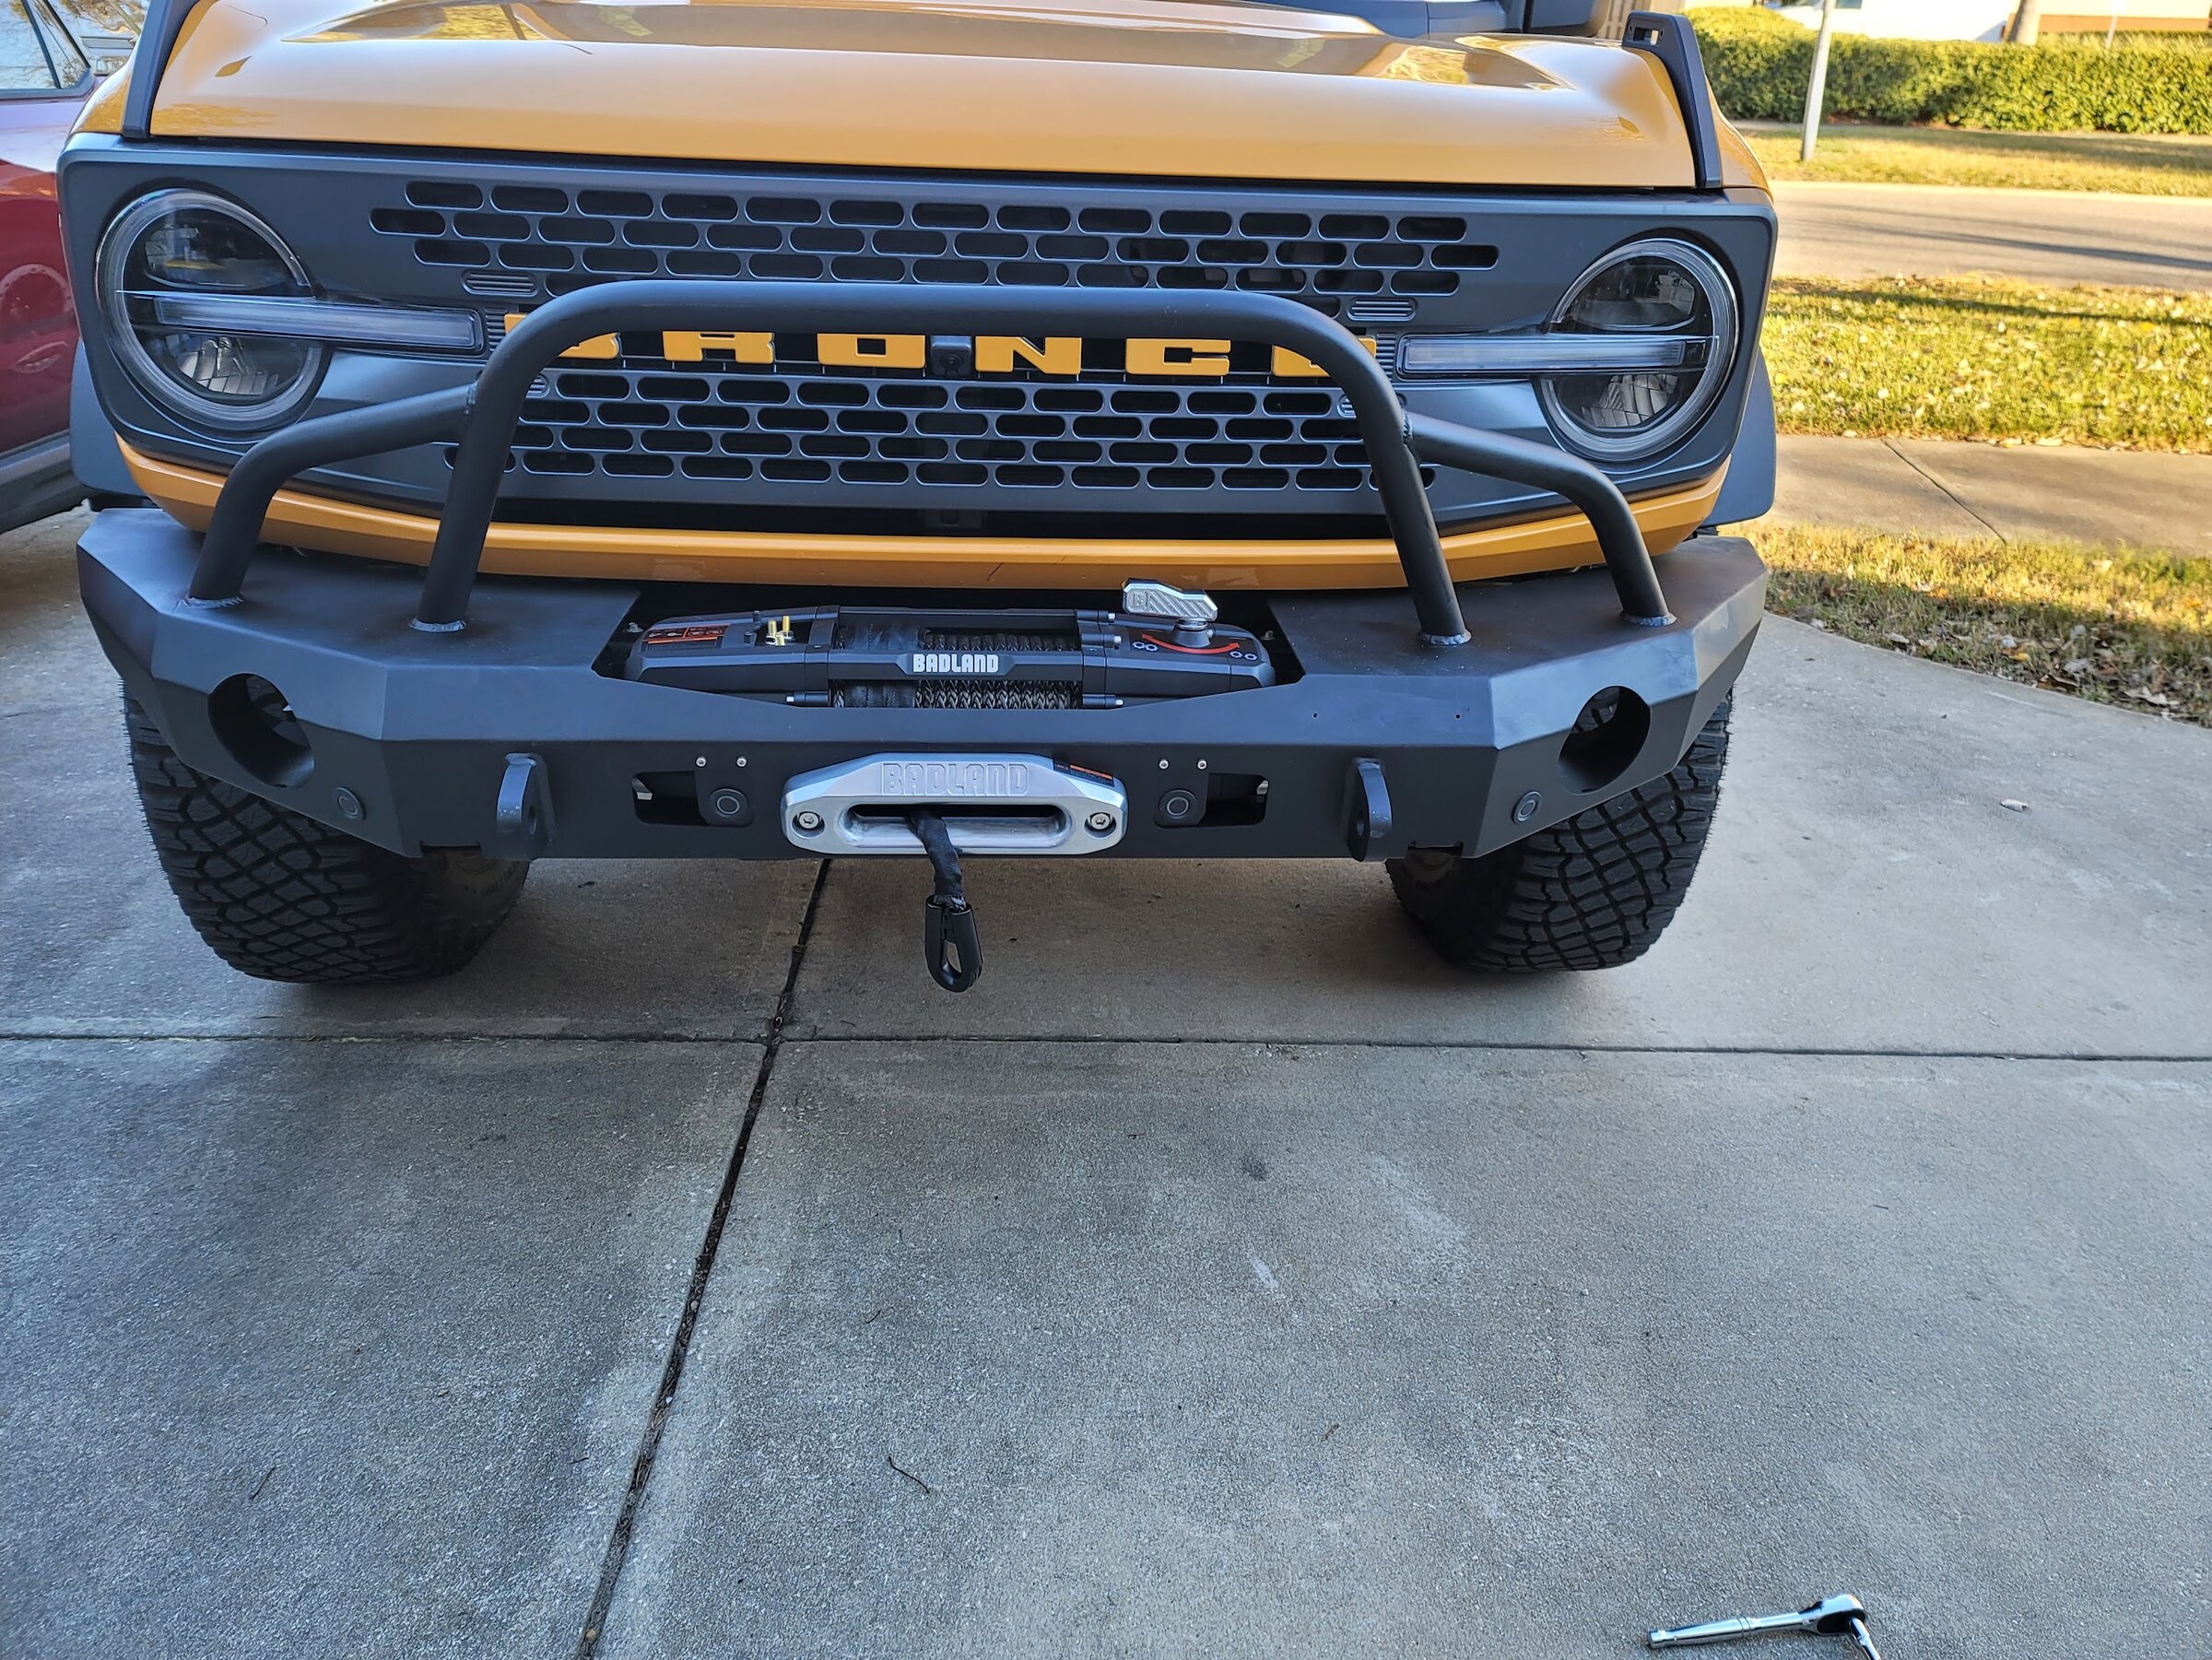 Ford Bronco Warn Elite bumper and Zeon 10s install w/photos and tips 20220123_164052